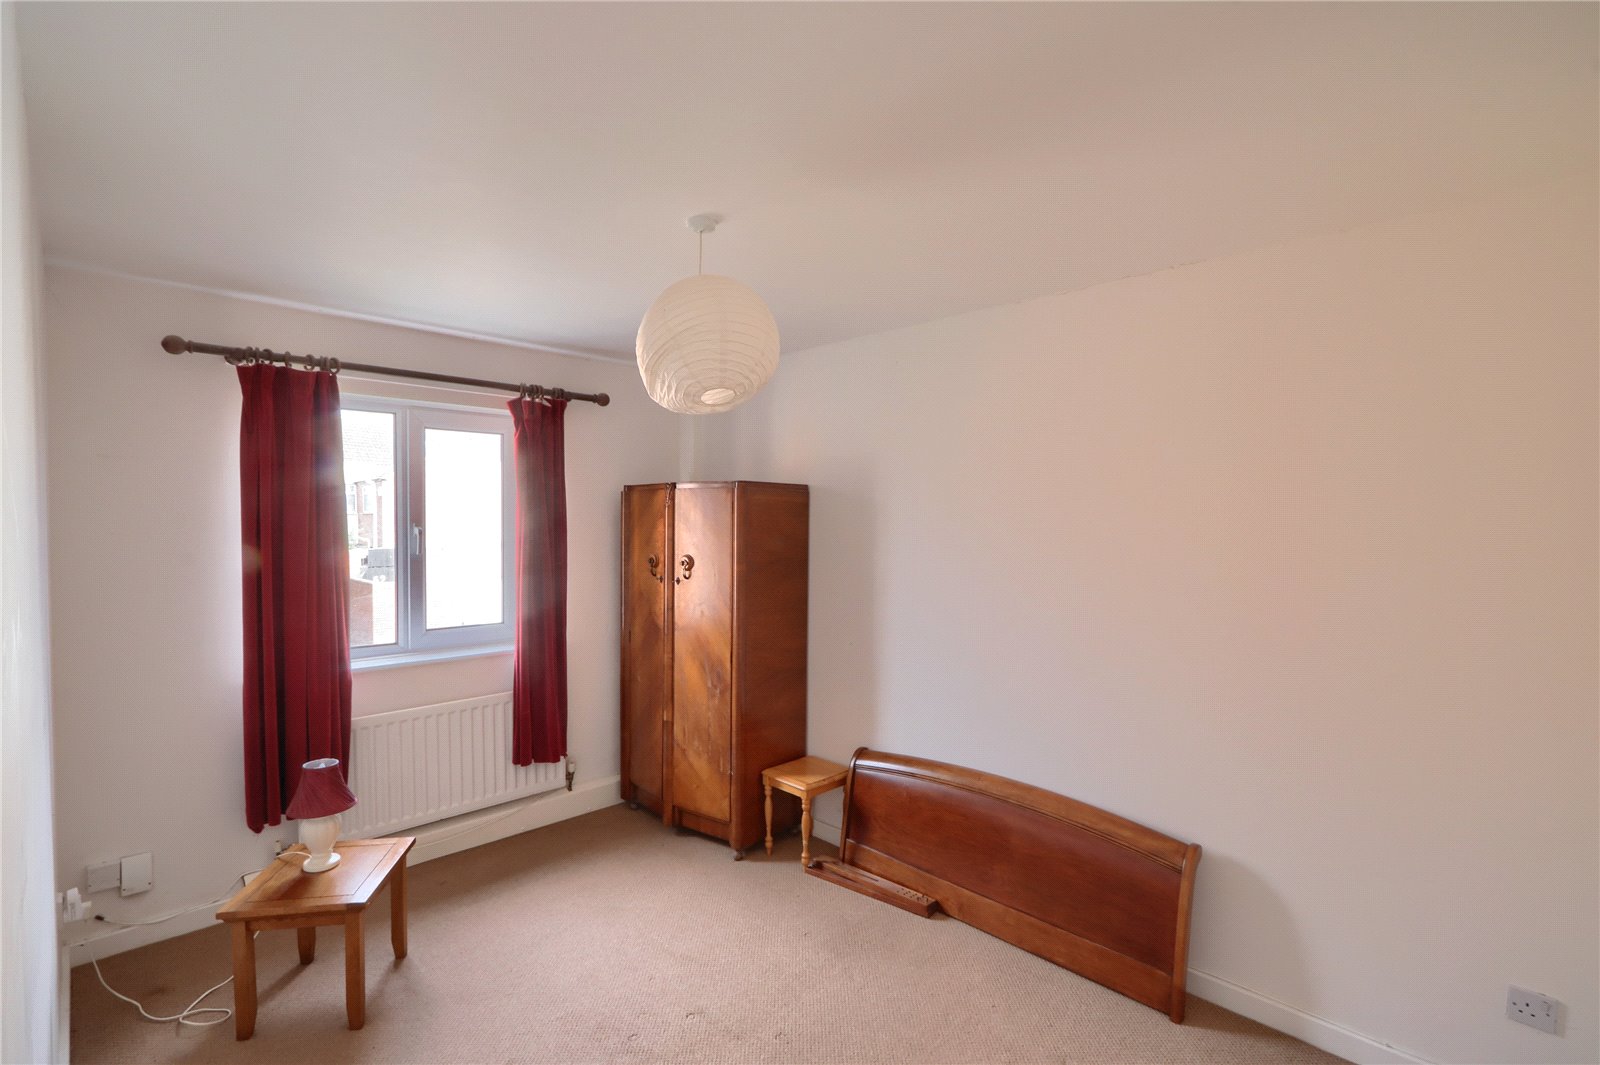 1 bed apartment for sale in Palmerston Street, Stockton-on-Tees  - Property Image 6